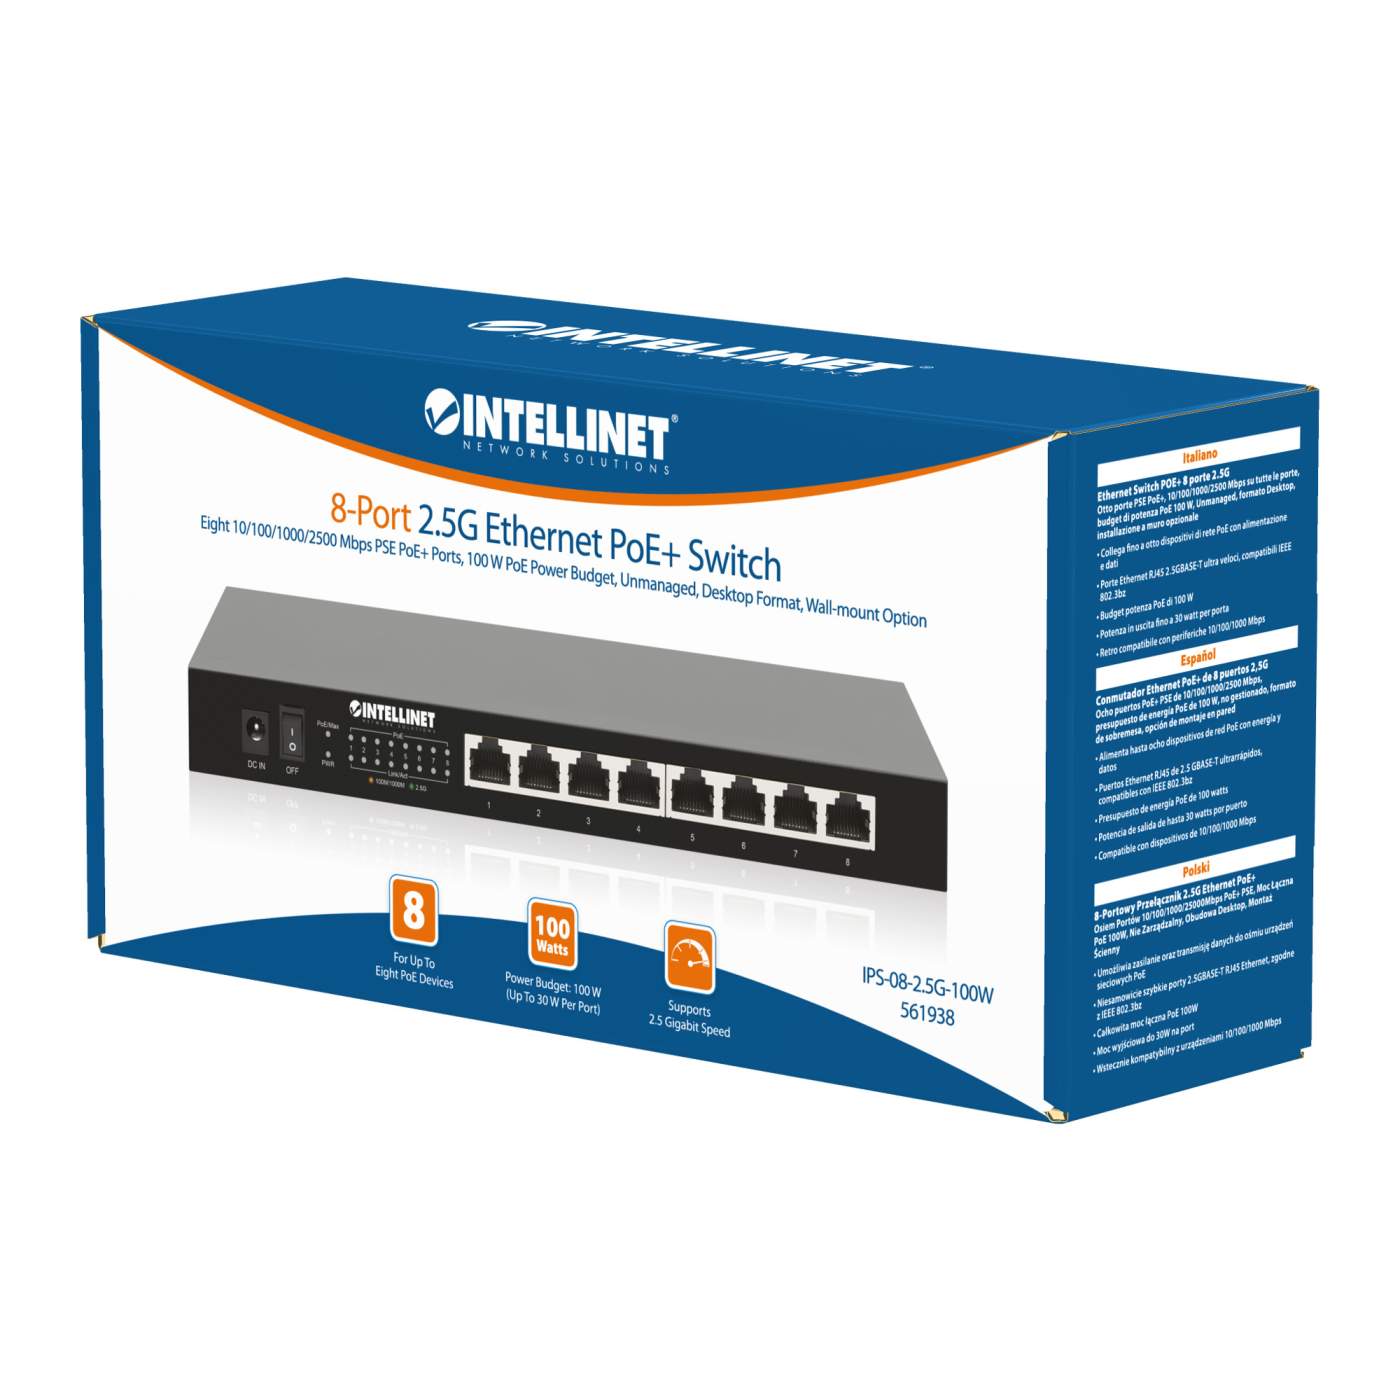 8-Port 2.5G Ethernet PoE+ Switch Packaging Image 2